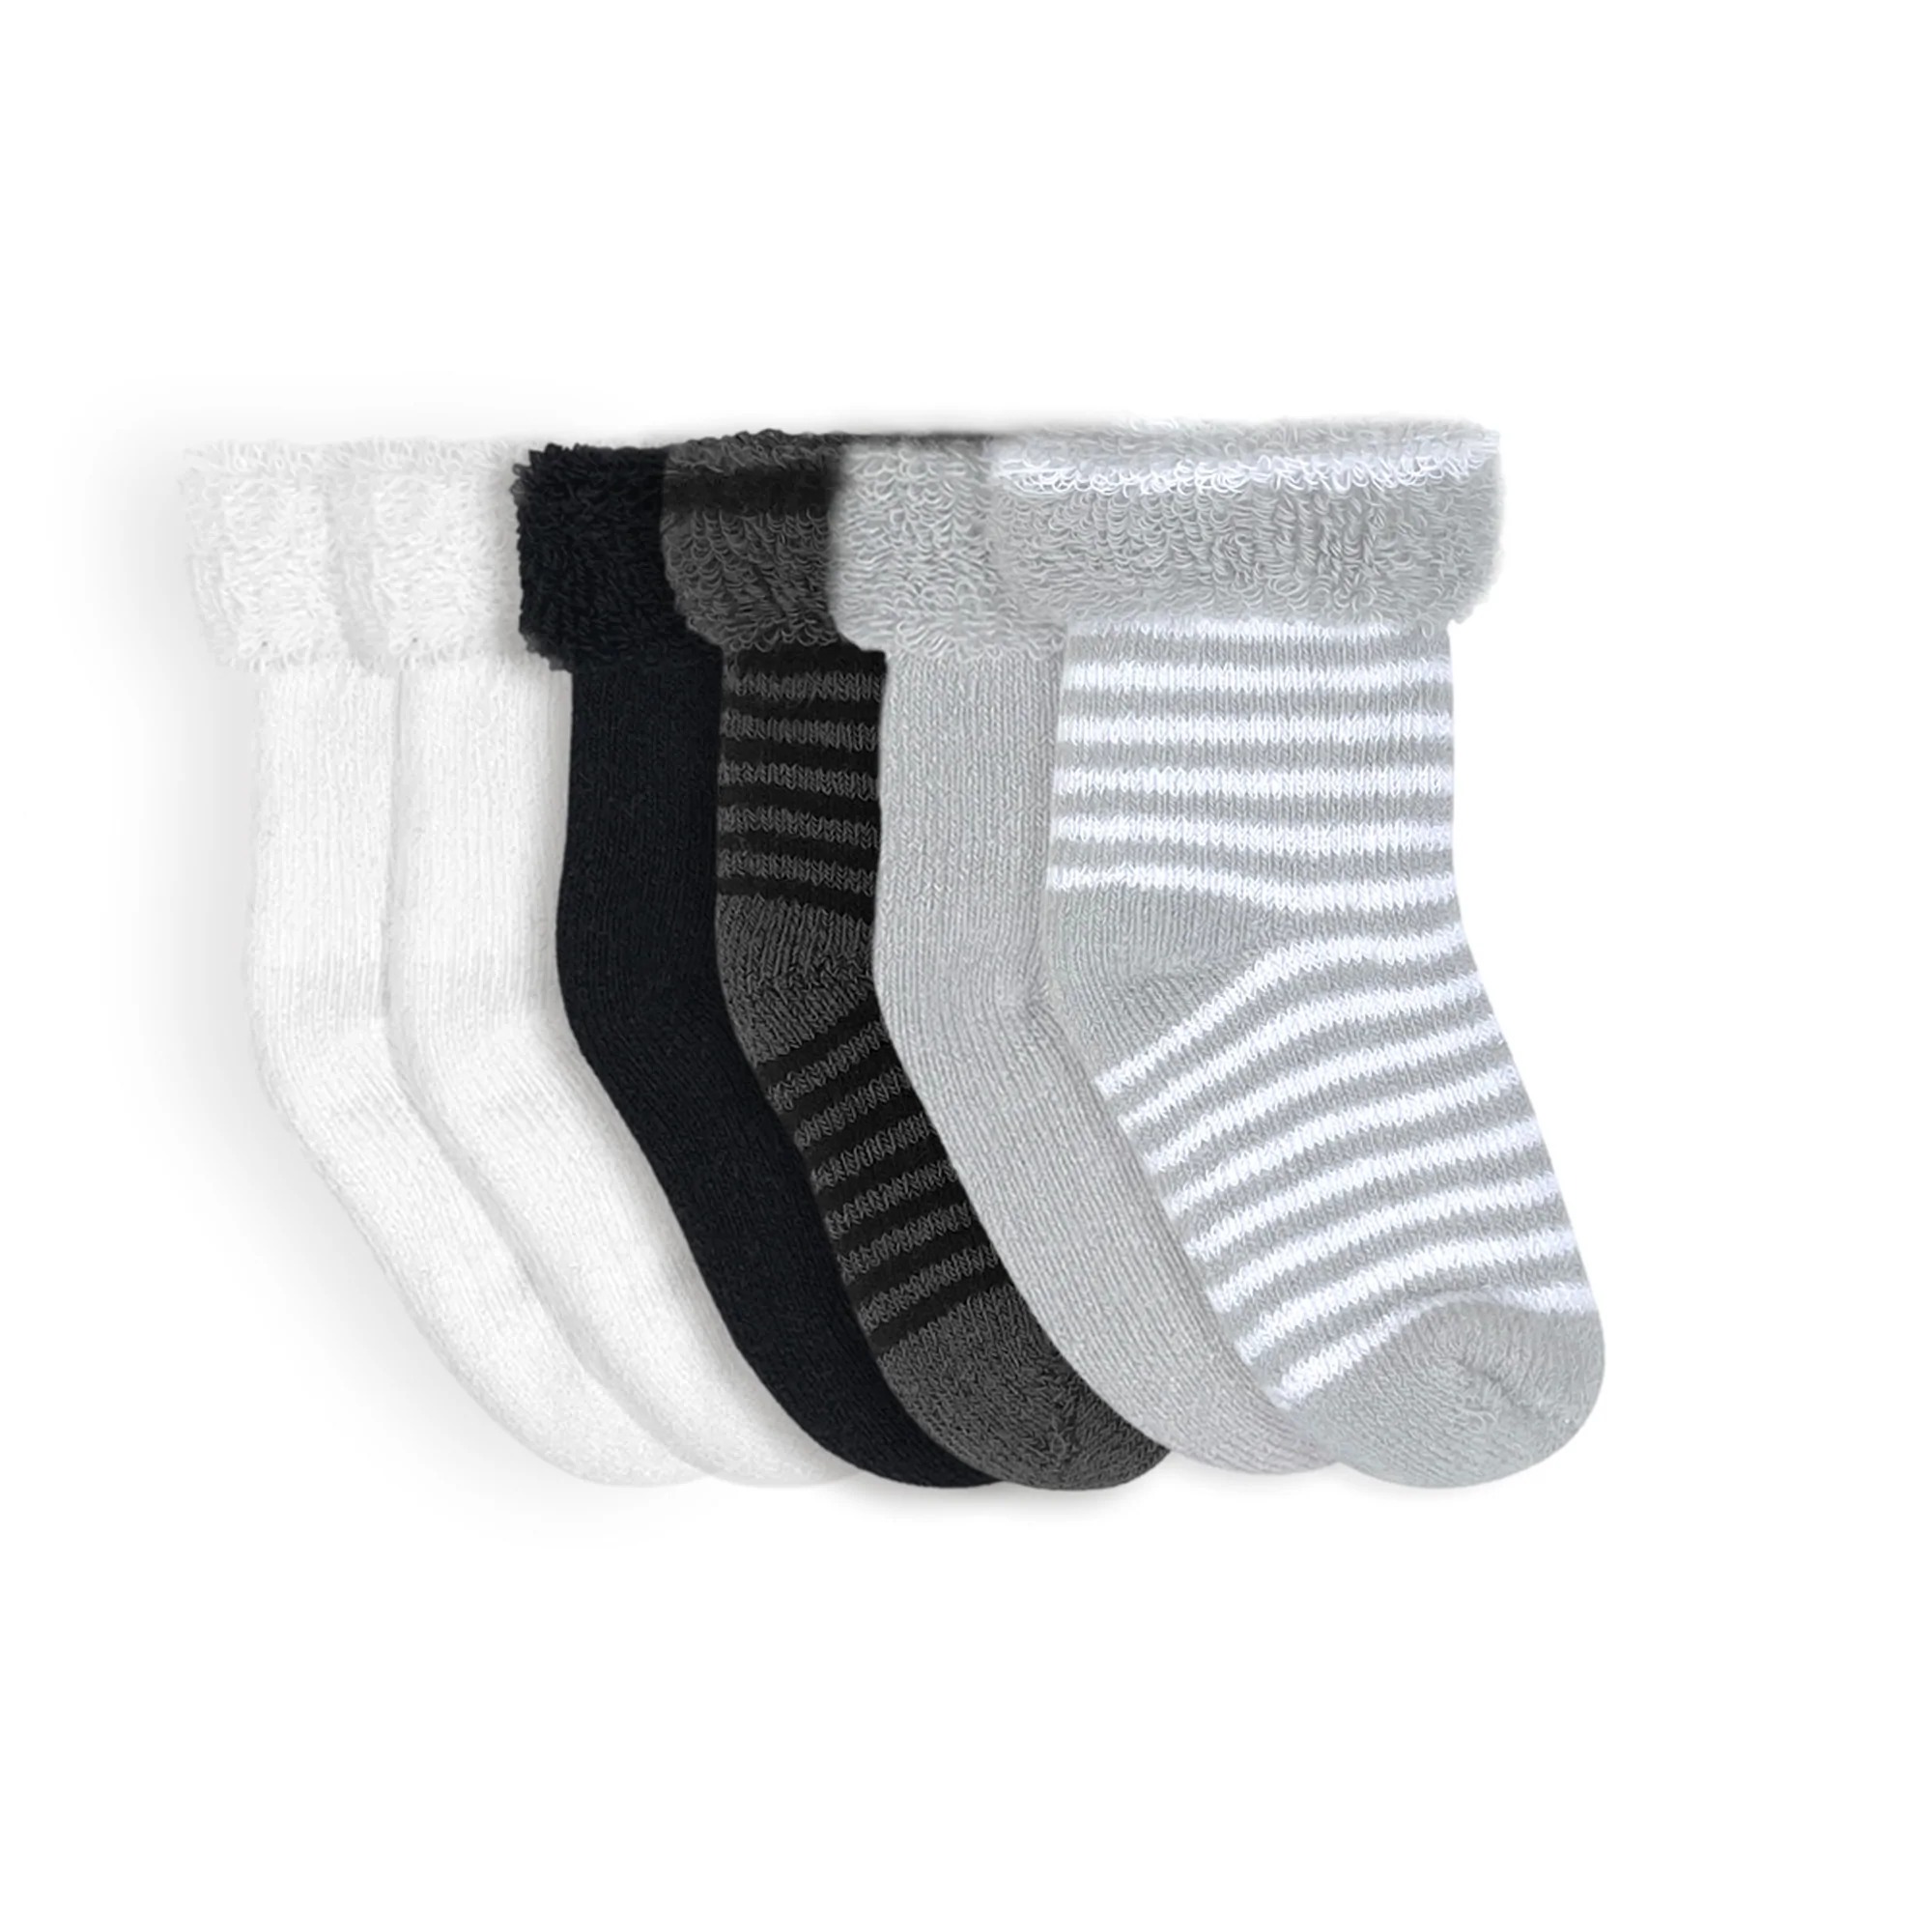 Kushies Terry Socks 6 Piece - Grey - 3-6 Months